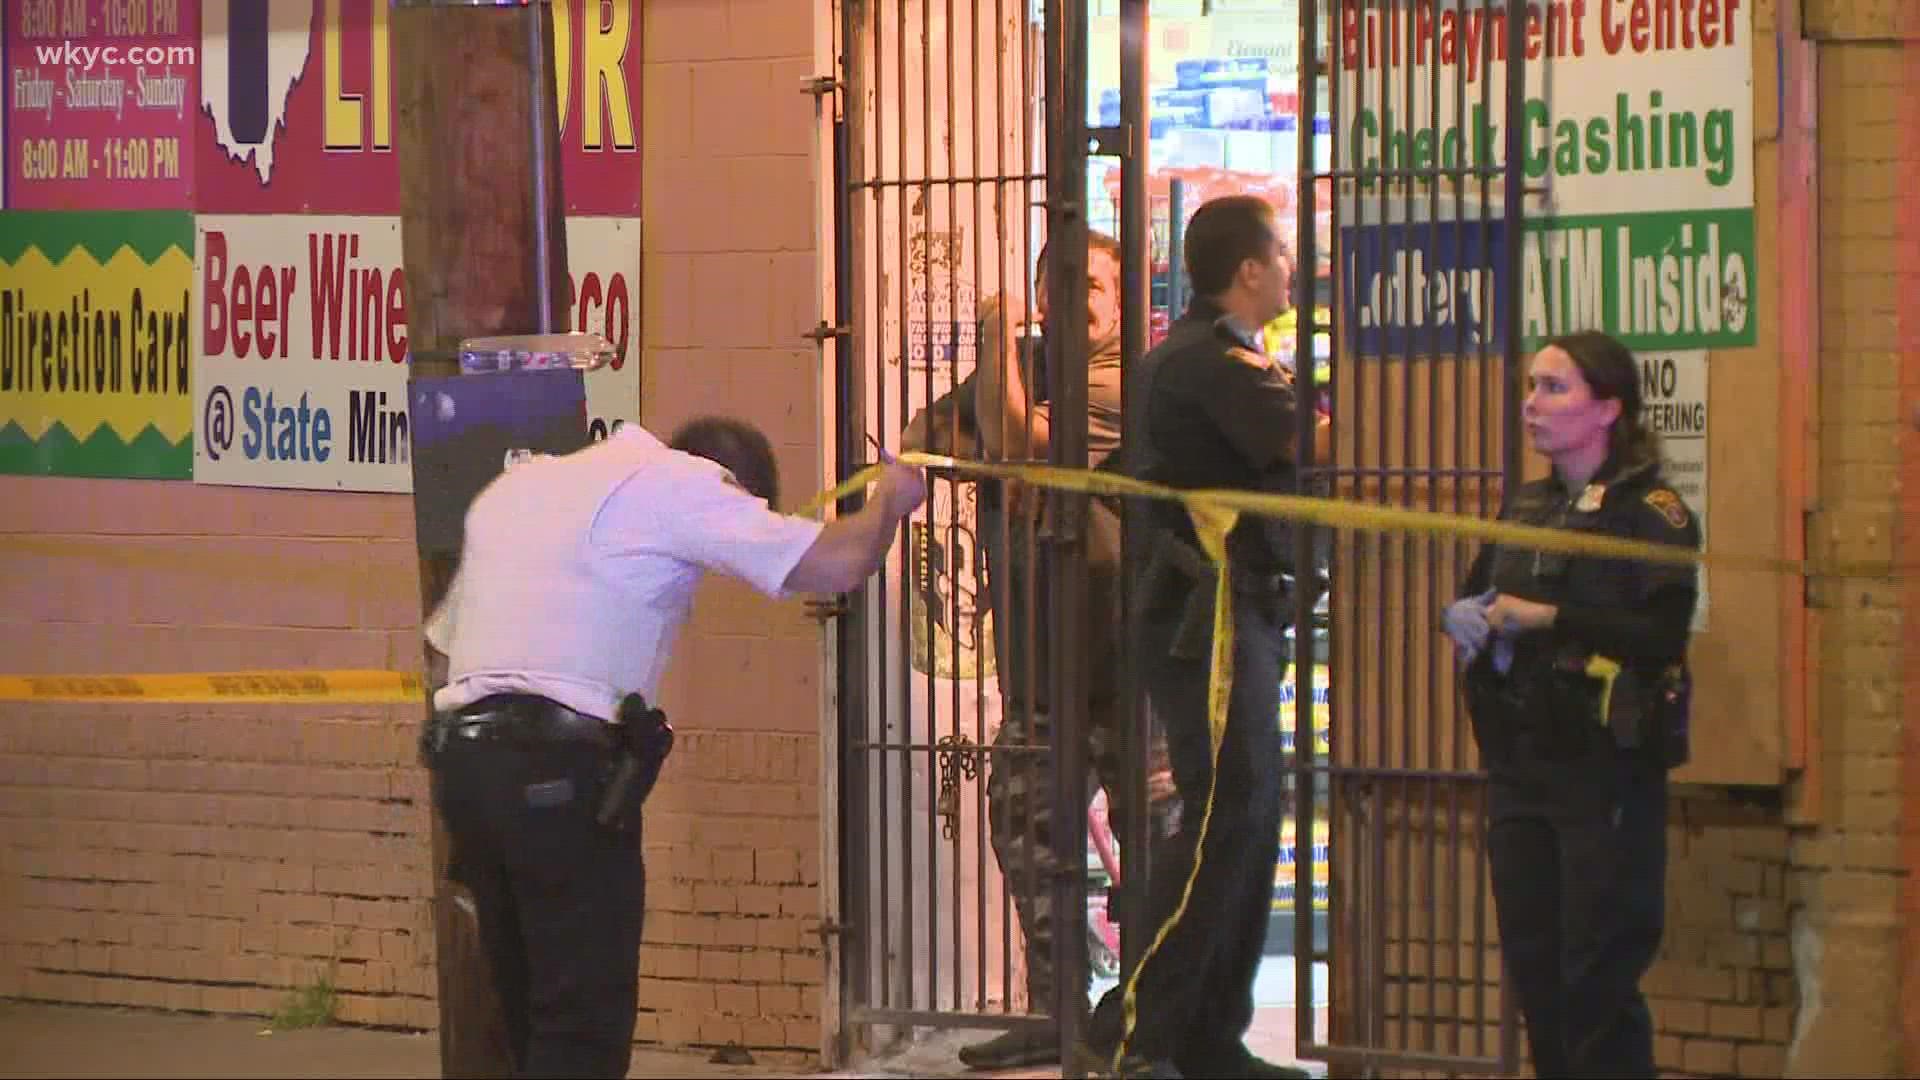 On Tuesday night, six people were shot at a liquor store on East 28th Street. Today, Cleveland police are searching for an unidentified suspect.